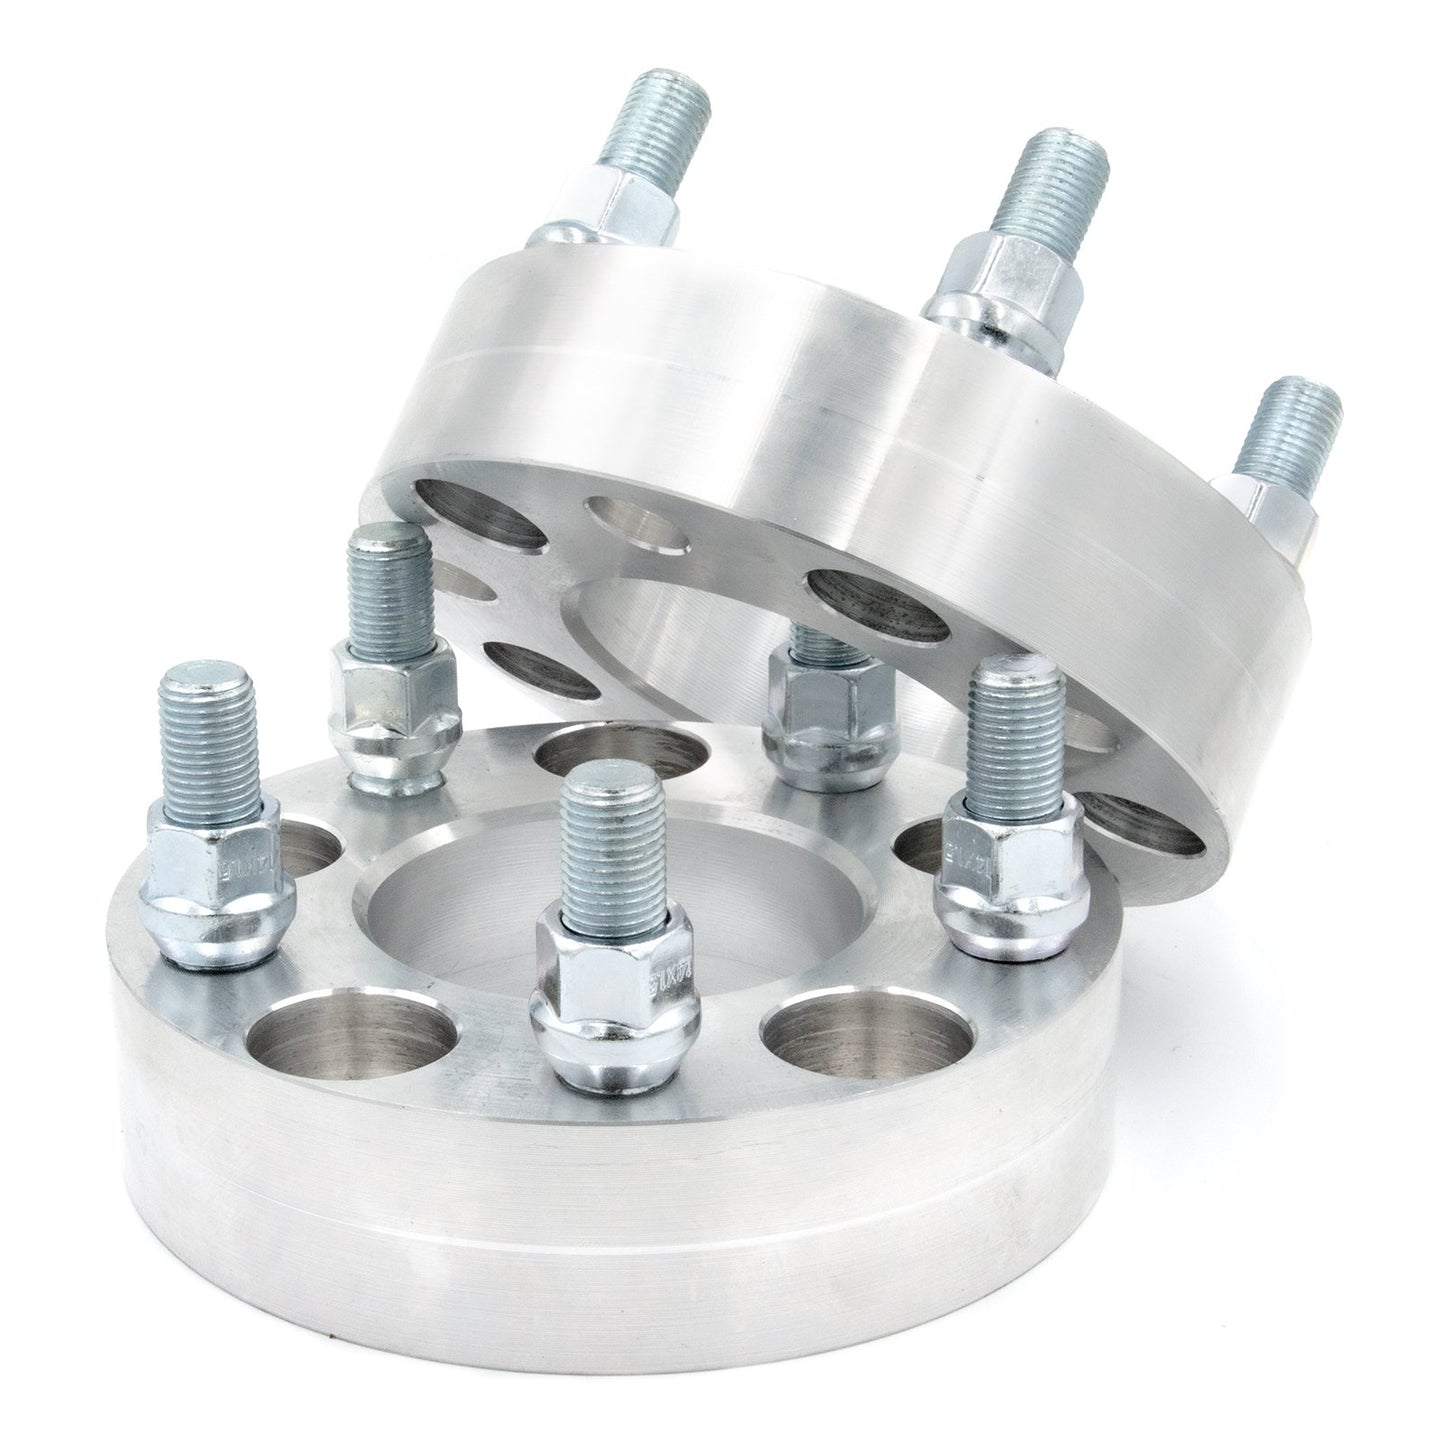 5x135 to 5x115 Wheel Spacer/Adapter - Thickness: 3/4"- 4"